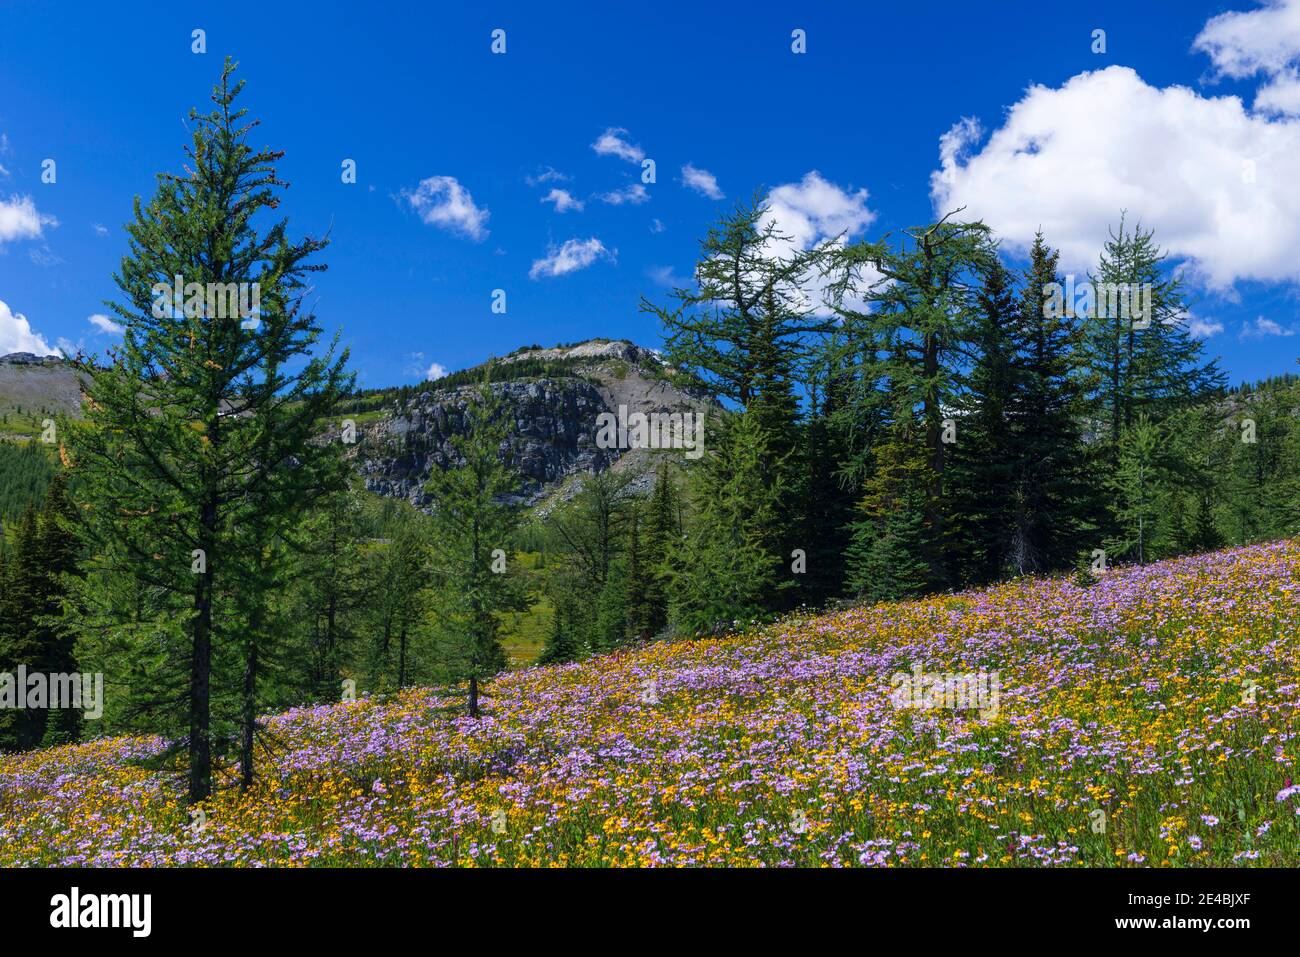 Wildflowers and larch trees in meadow, Healy Pass, Alberta, Canada Stock Photo